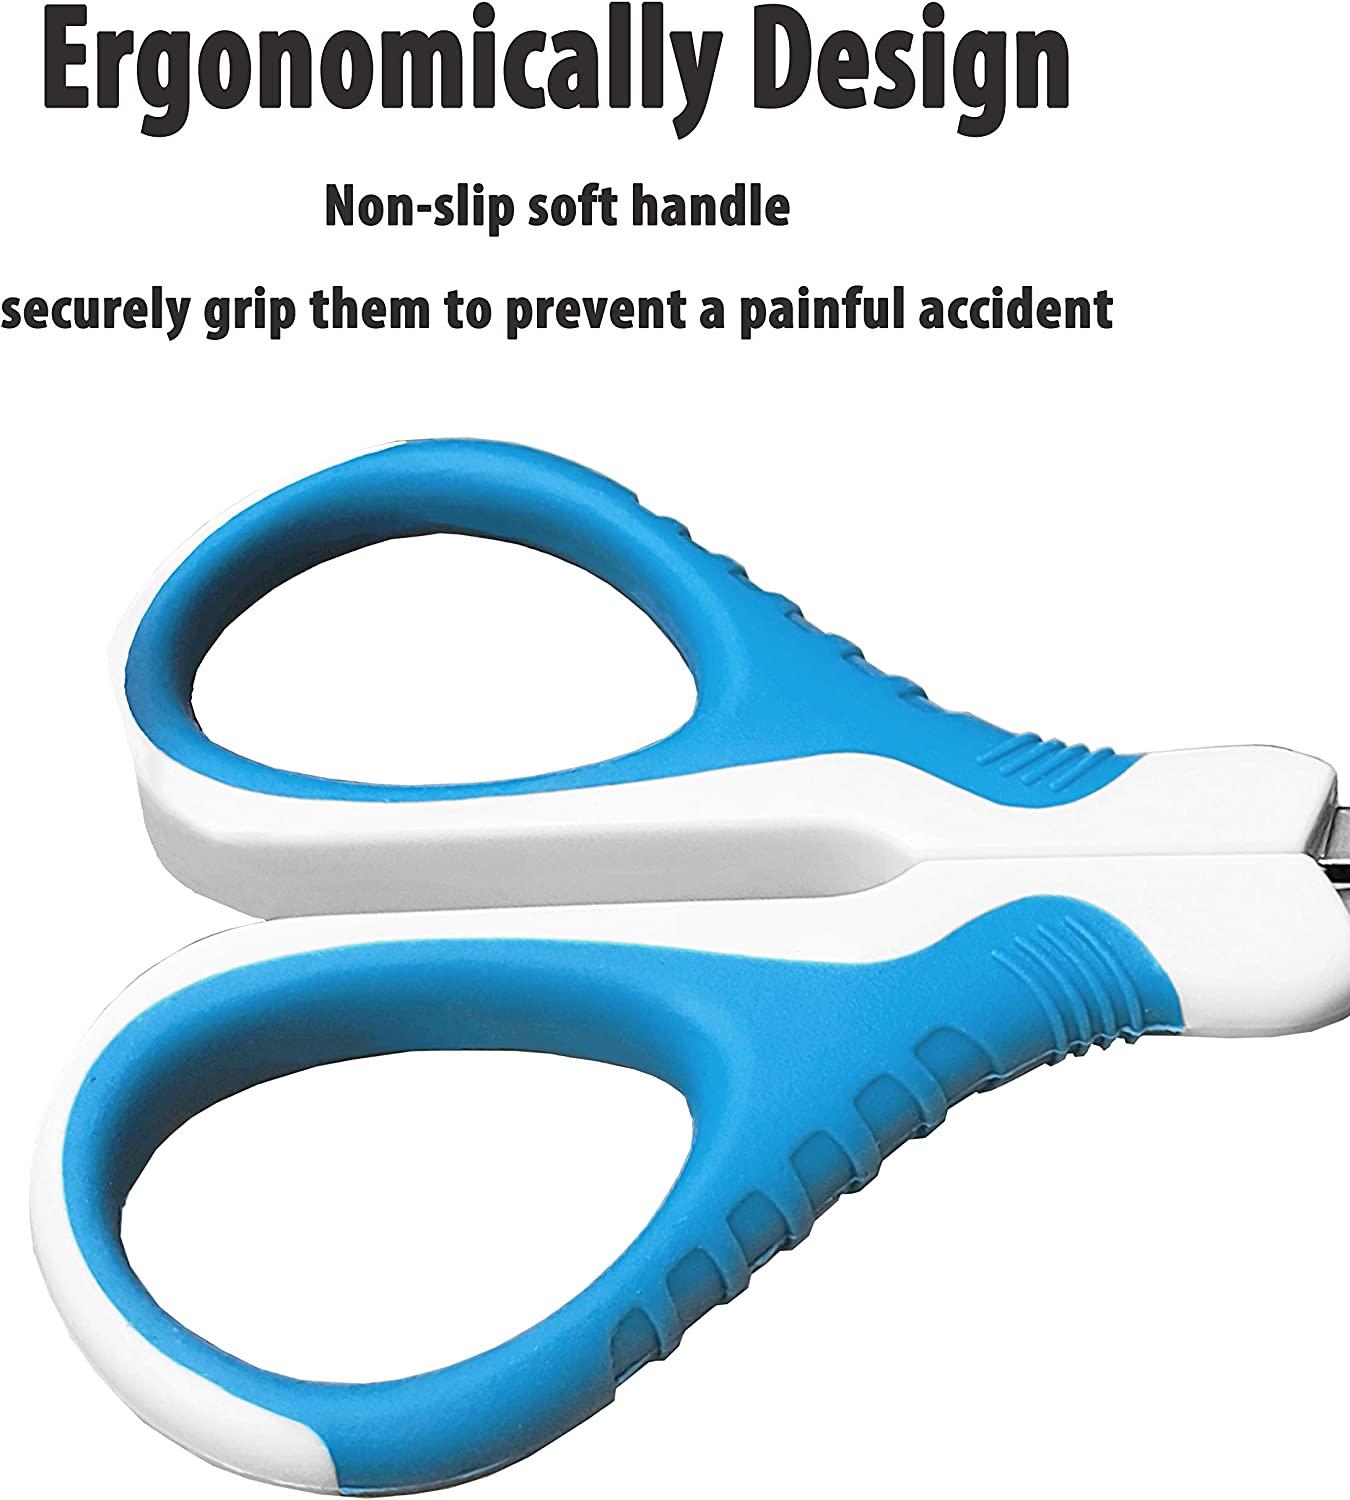 Amazon.com: gonicc Professional Pet Nail Clippers and Trimmer - Best for  Cats, Small Dogs and Any Small Pets. Sharp Angled Blade Pet Nail Trimmer  Scissors.